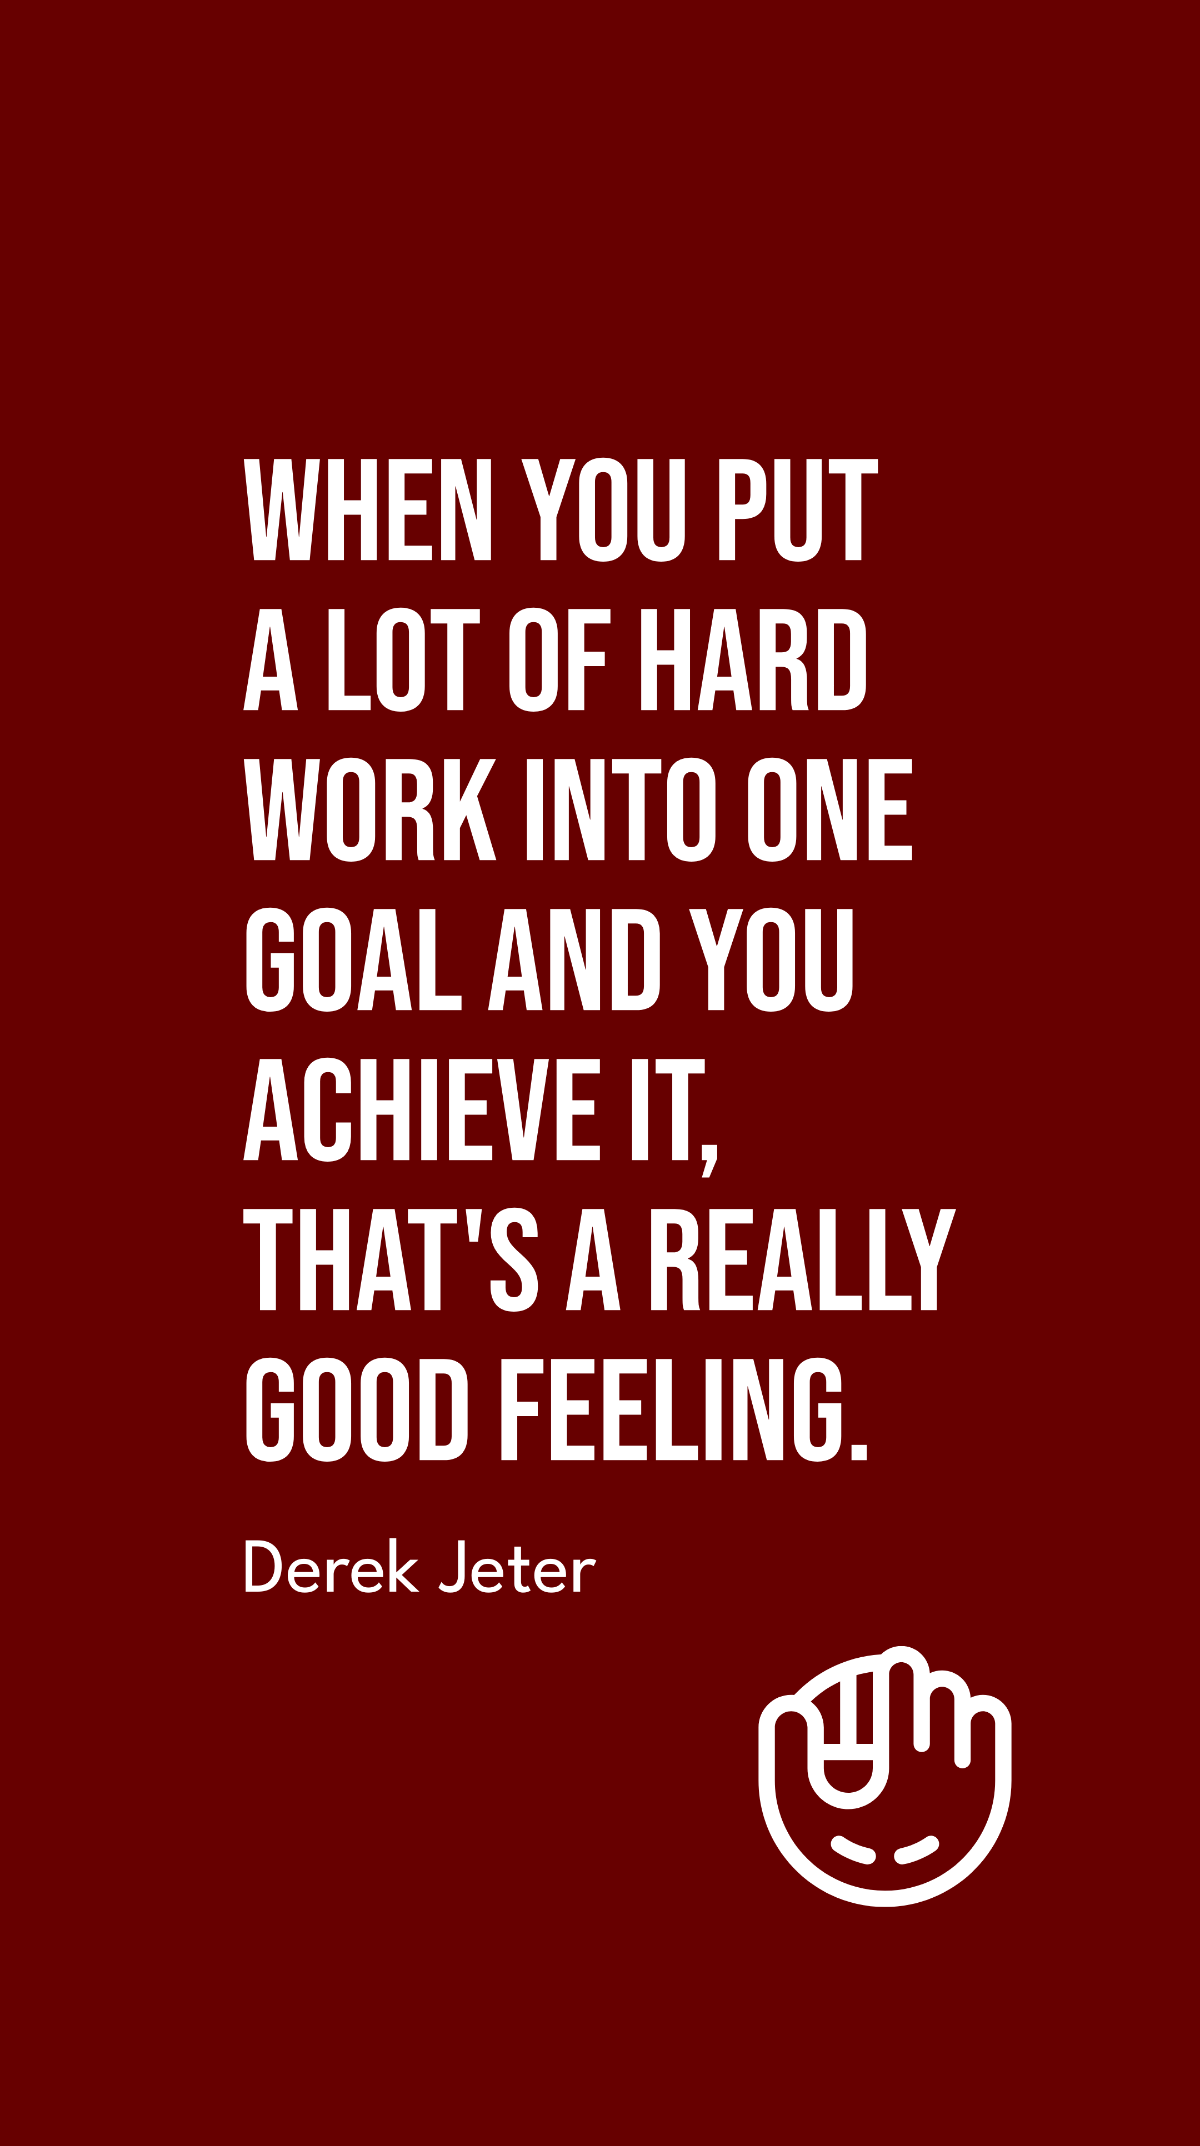 Derek Jeter - When you put a lot of hard work into one goal and you achieve it, that's a really good feeling. 